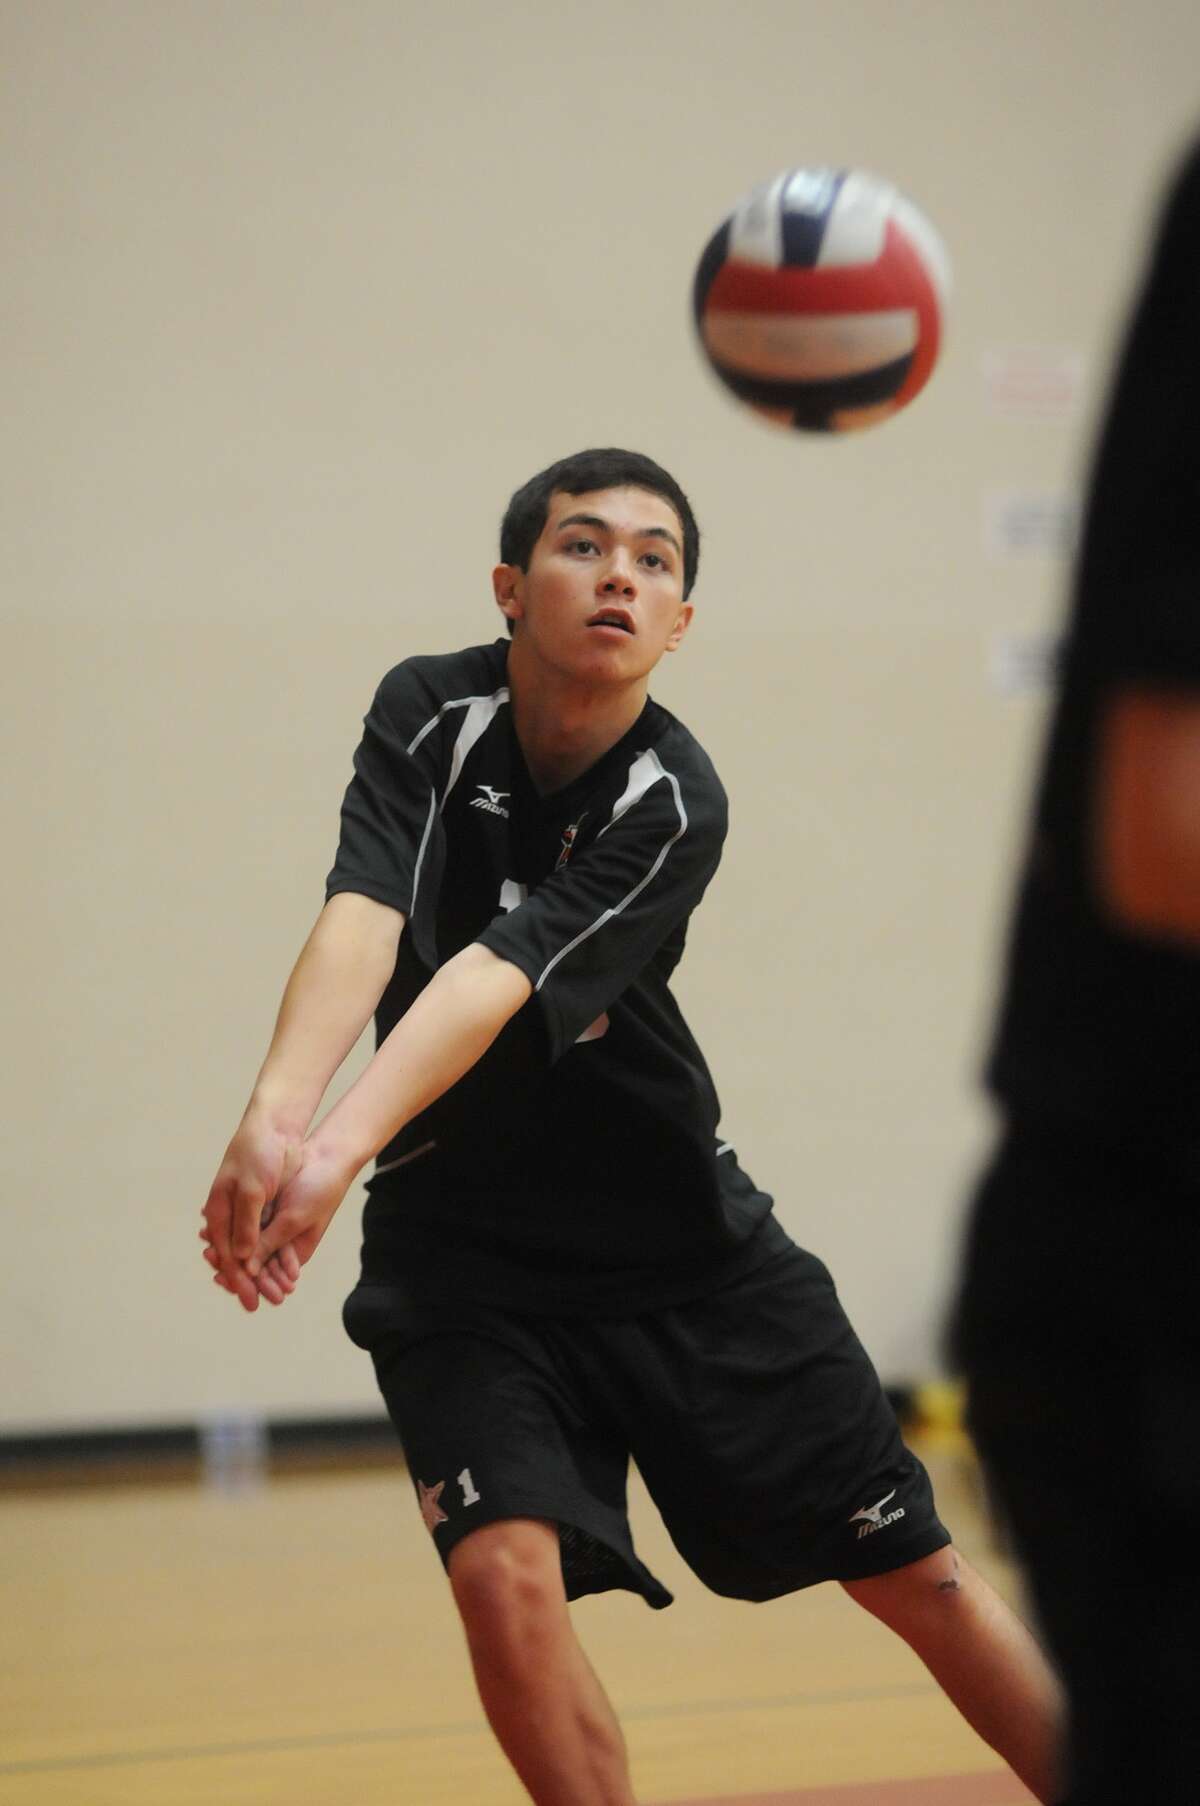 Volleyball: Size, athleticism puts St. John's boys in the title hunt